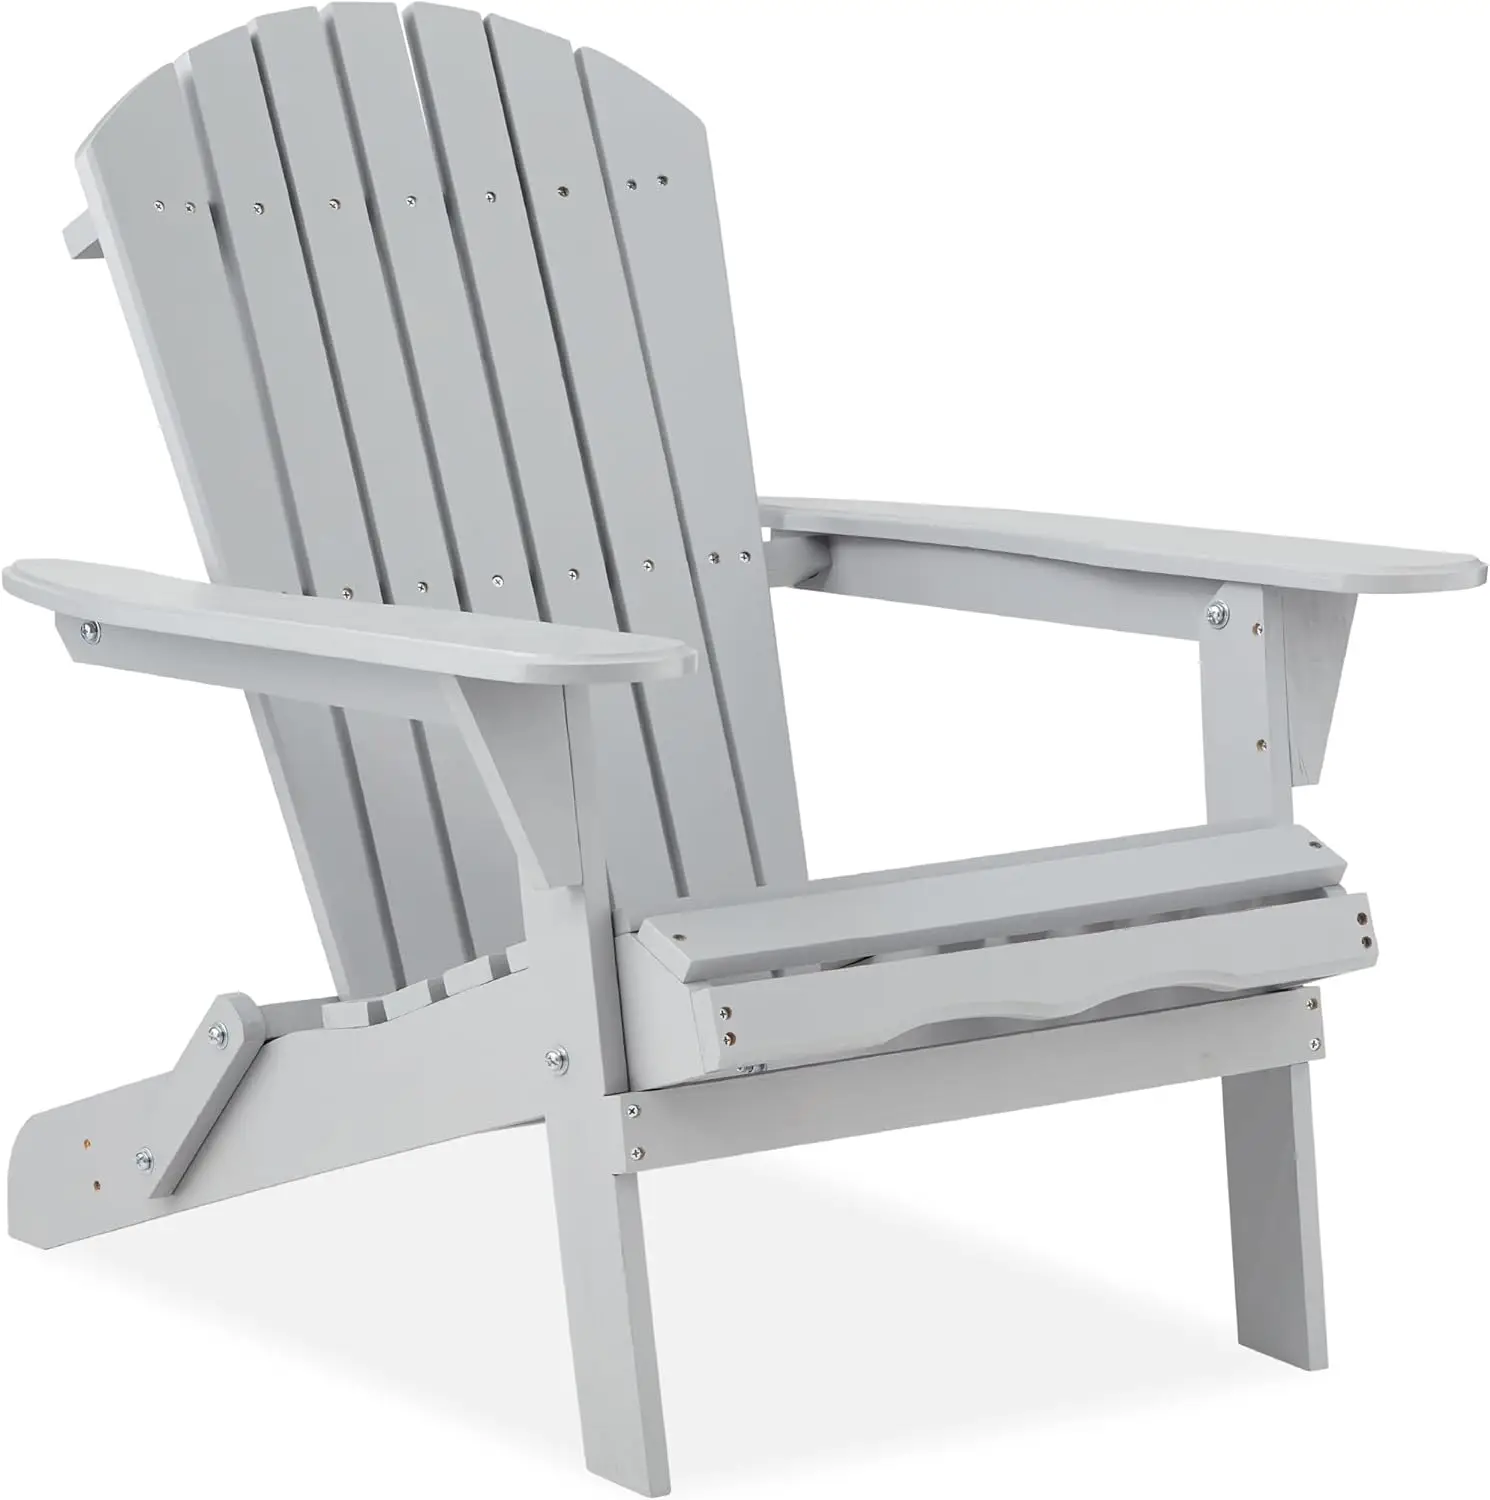 

Best Choice Products Folding Adirondack Chair Outdoor Wooden Accent Furniture Fire Pit Lounge Chairs for Yard, Garden, Patio w/